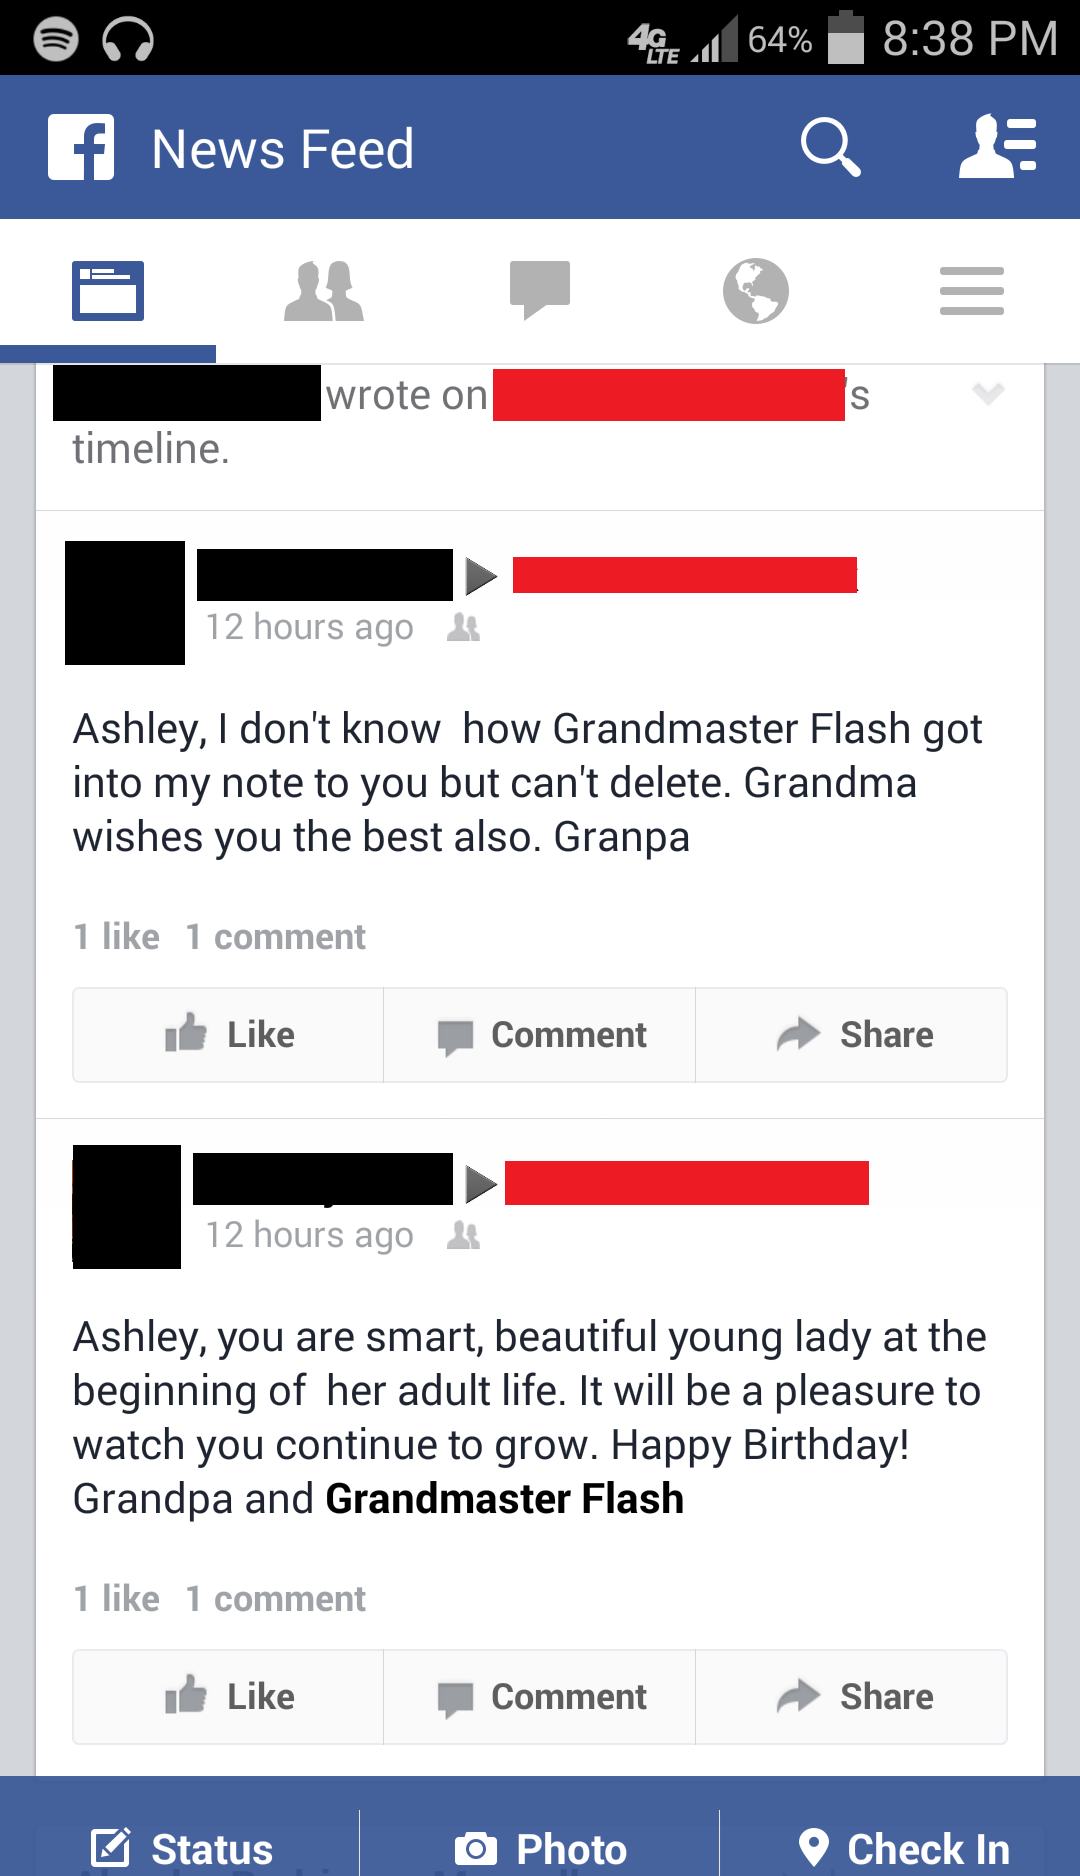 grandparent facebook fails - 46 64% f News Feed wrote on timeline. 12 hours ago Ashley, I don't know how Grandmaster Flash got into my note to you but can't delete. Grandma wishes you the best also. Granpa 1 1 comment It Comment 12 hours ago Ashley, you a